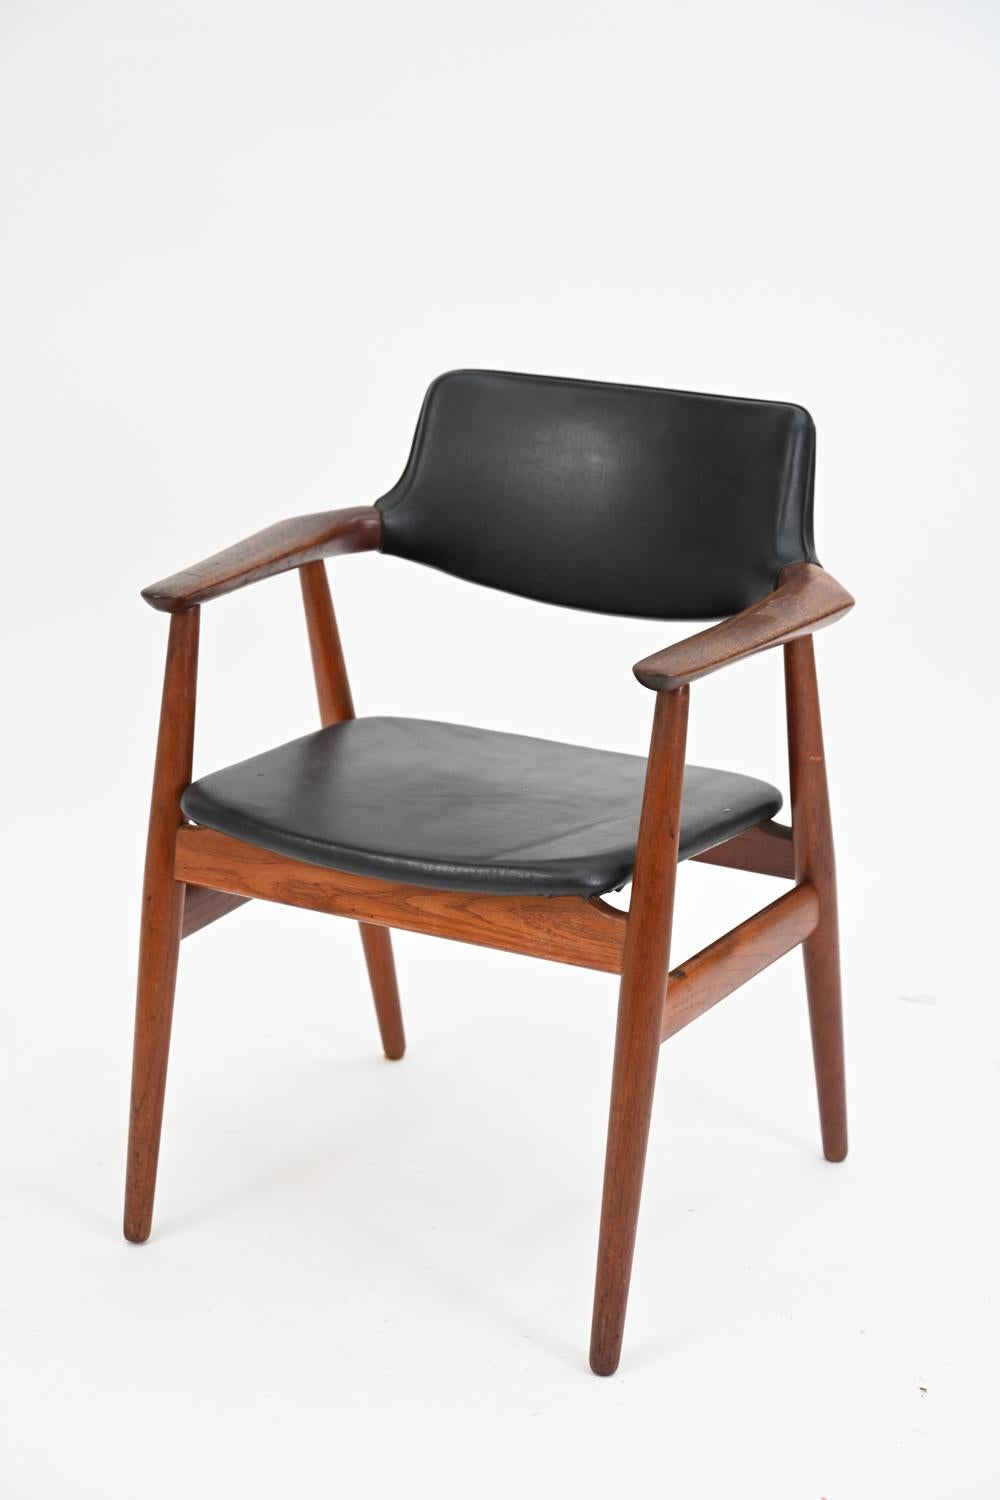 A stylish Danish mid-century armchair designed by Erik Kirkegaard, c. 1960's. This Scandinavian modern chair features a teak frame with striking angles and black vinyl upholstery. A great accent piece for a living space.